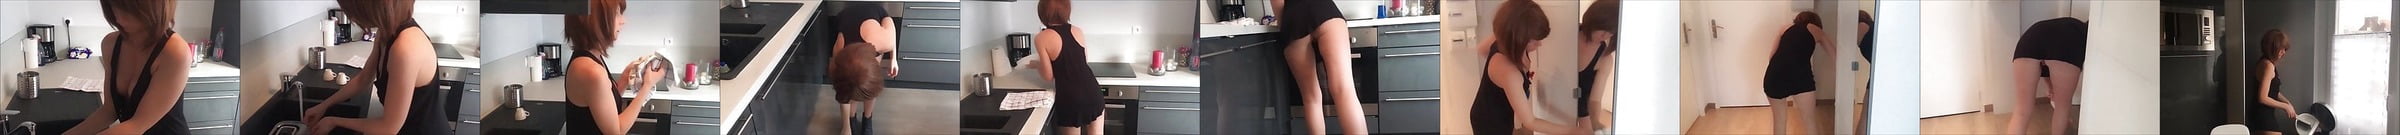 French Maid Fucked By Her Boss Free French List Porn Video Xhamster